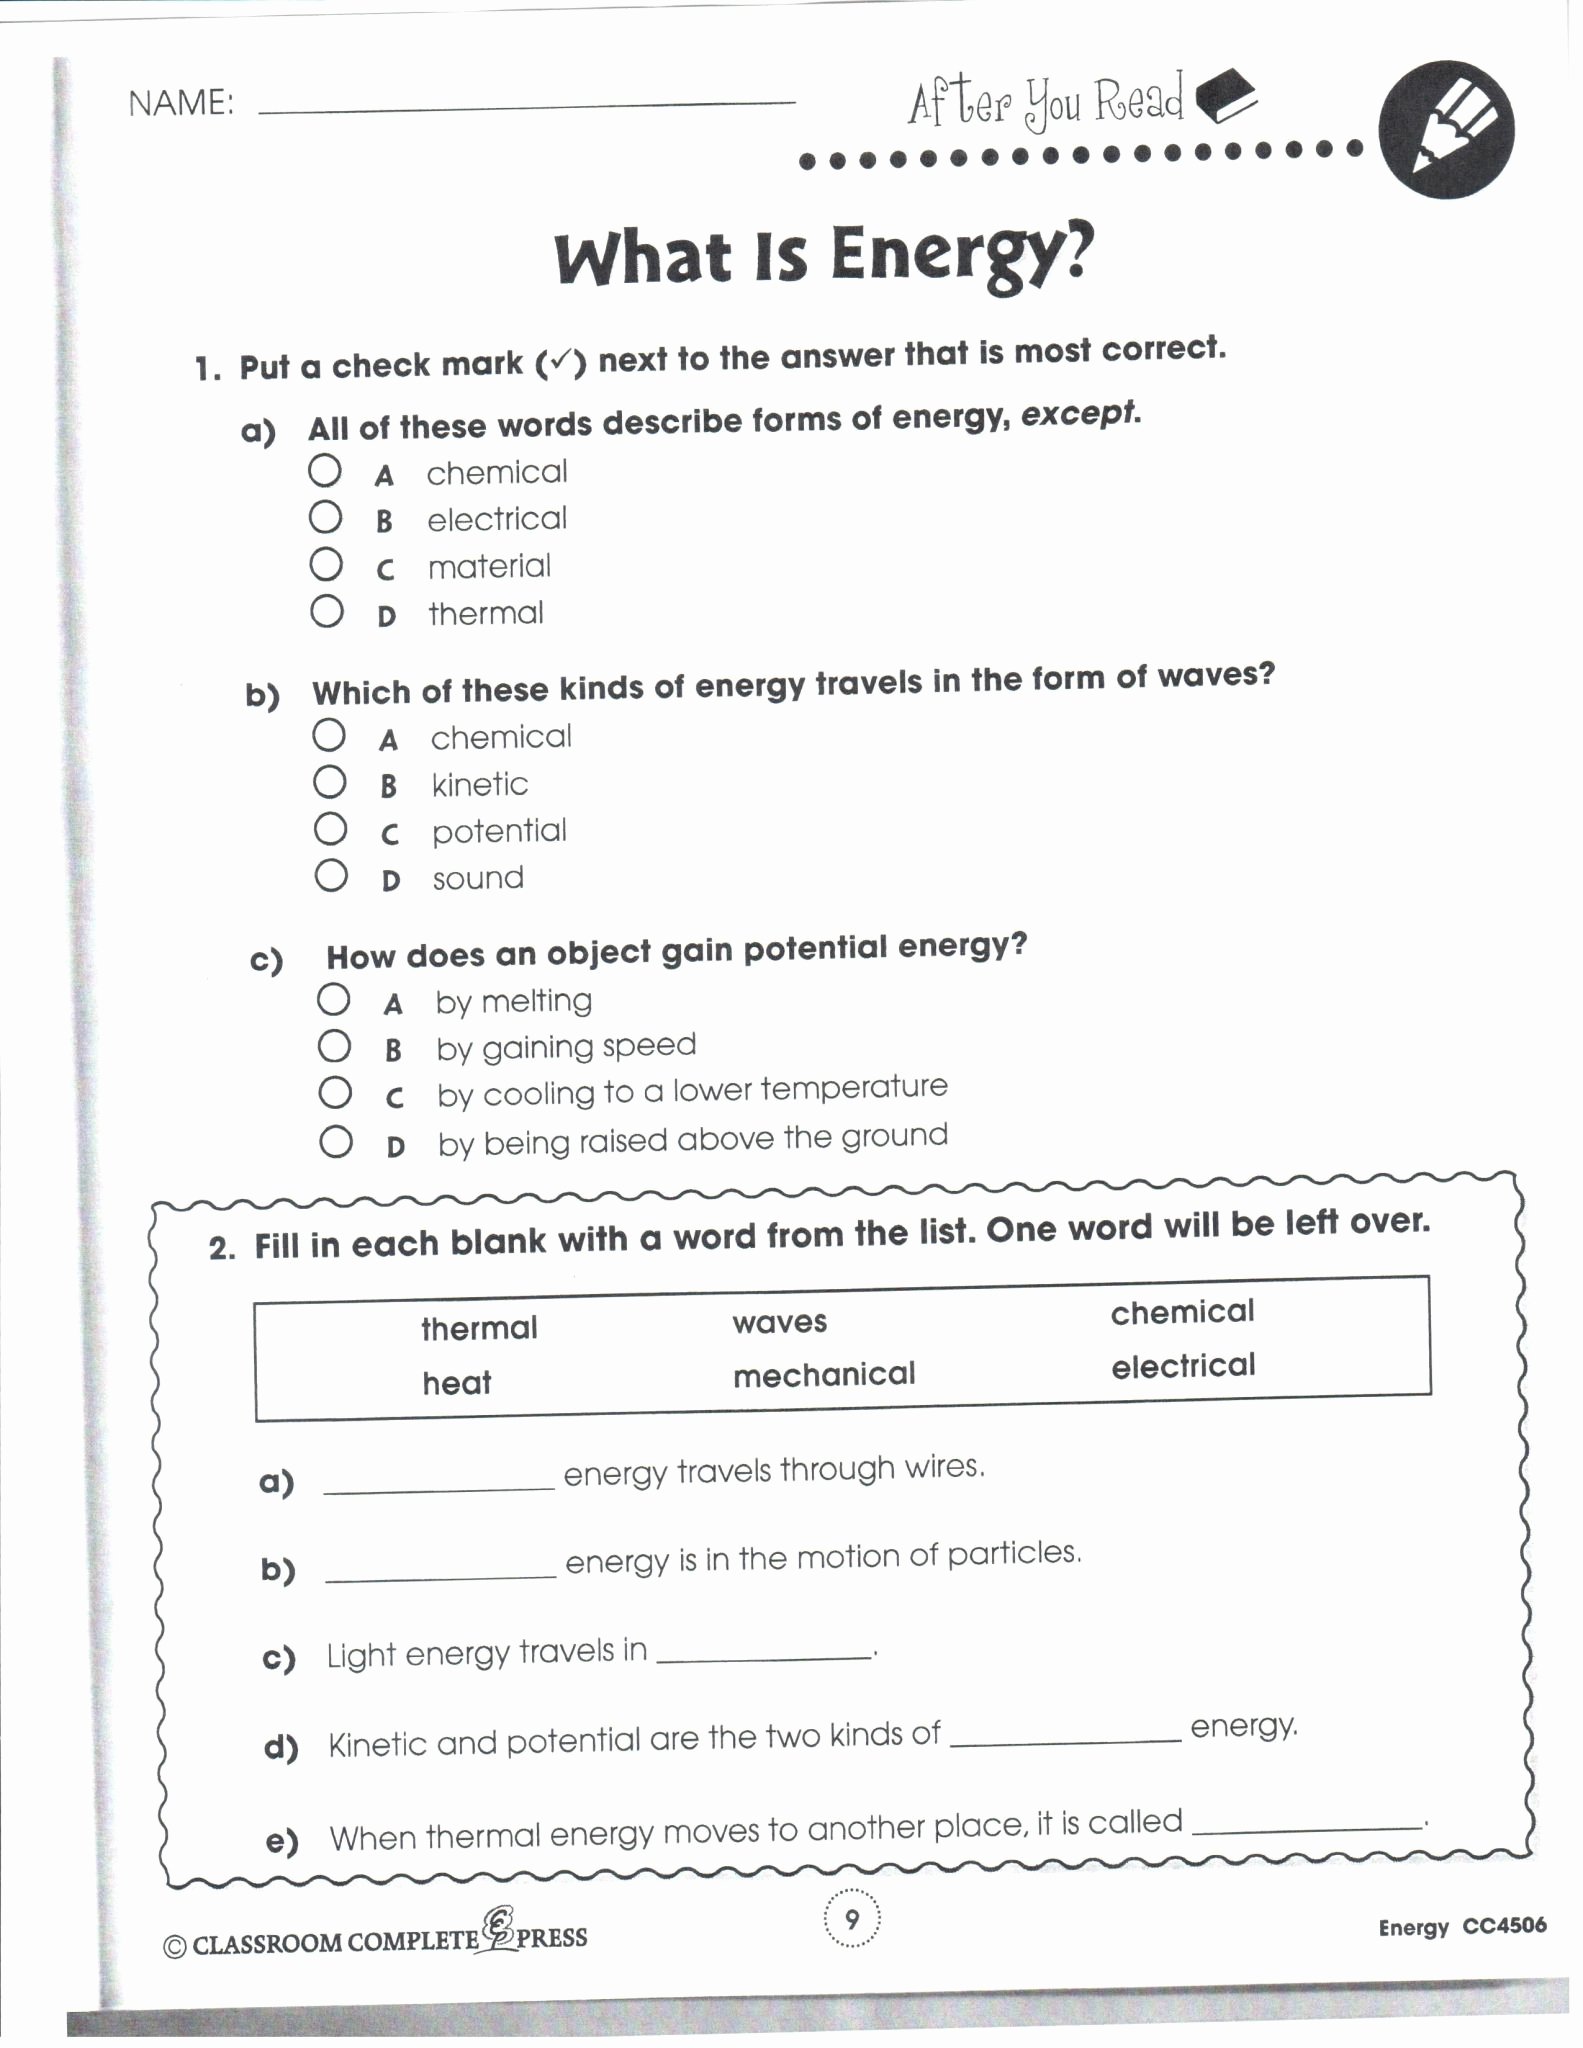 Chemistry Worksheet Matter 1 Answers Awesome Chemistry Worksheet Matter 1 Answer Key